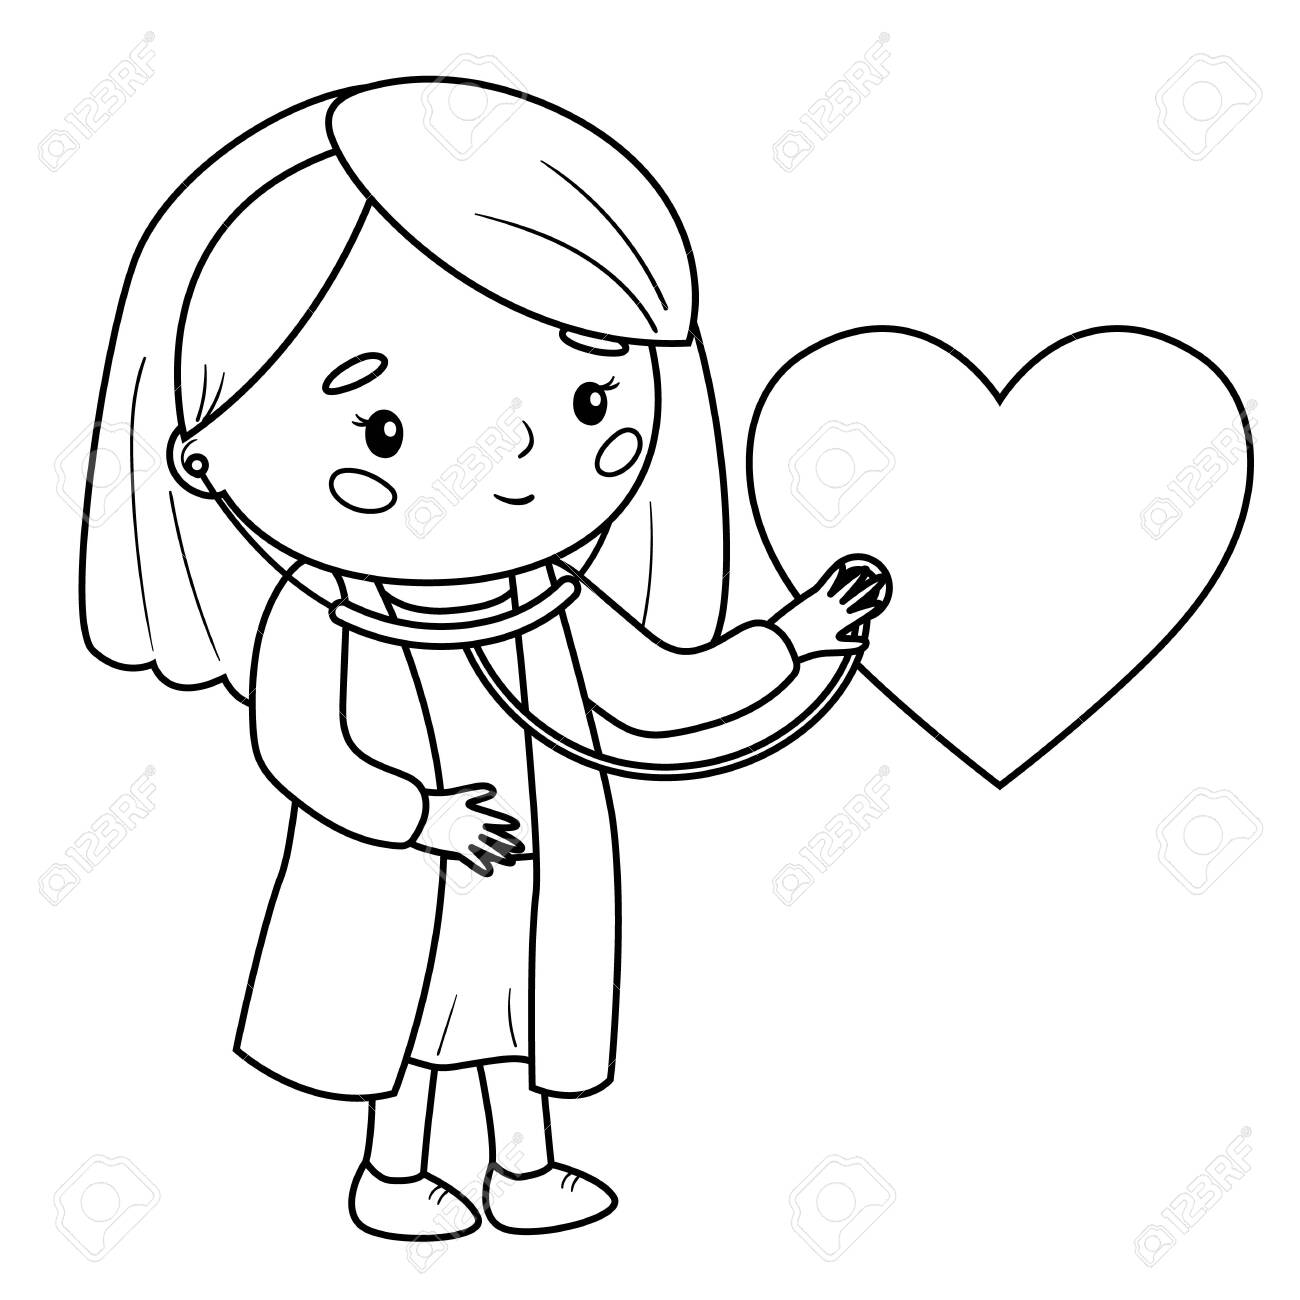 Medicine coloring page for children doctor listen the heart with stethoscope outline vector illustration healthcare for kids royalty free svg cliparts vectors and stock illustration image